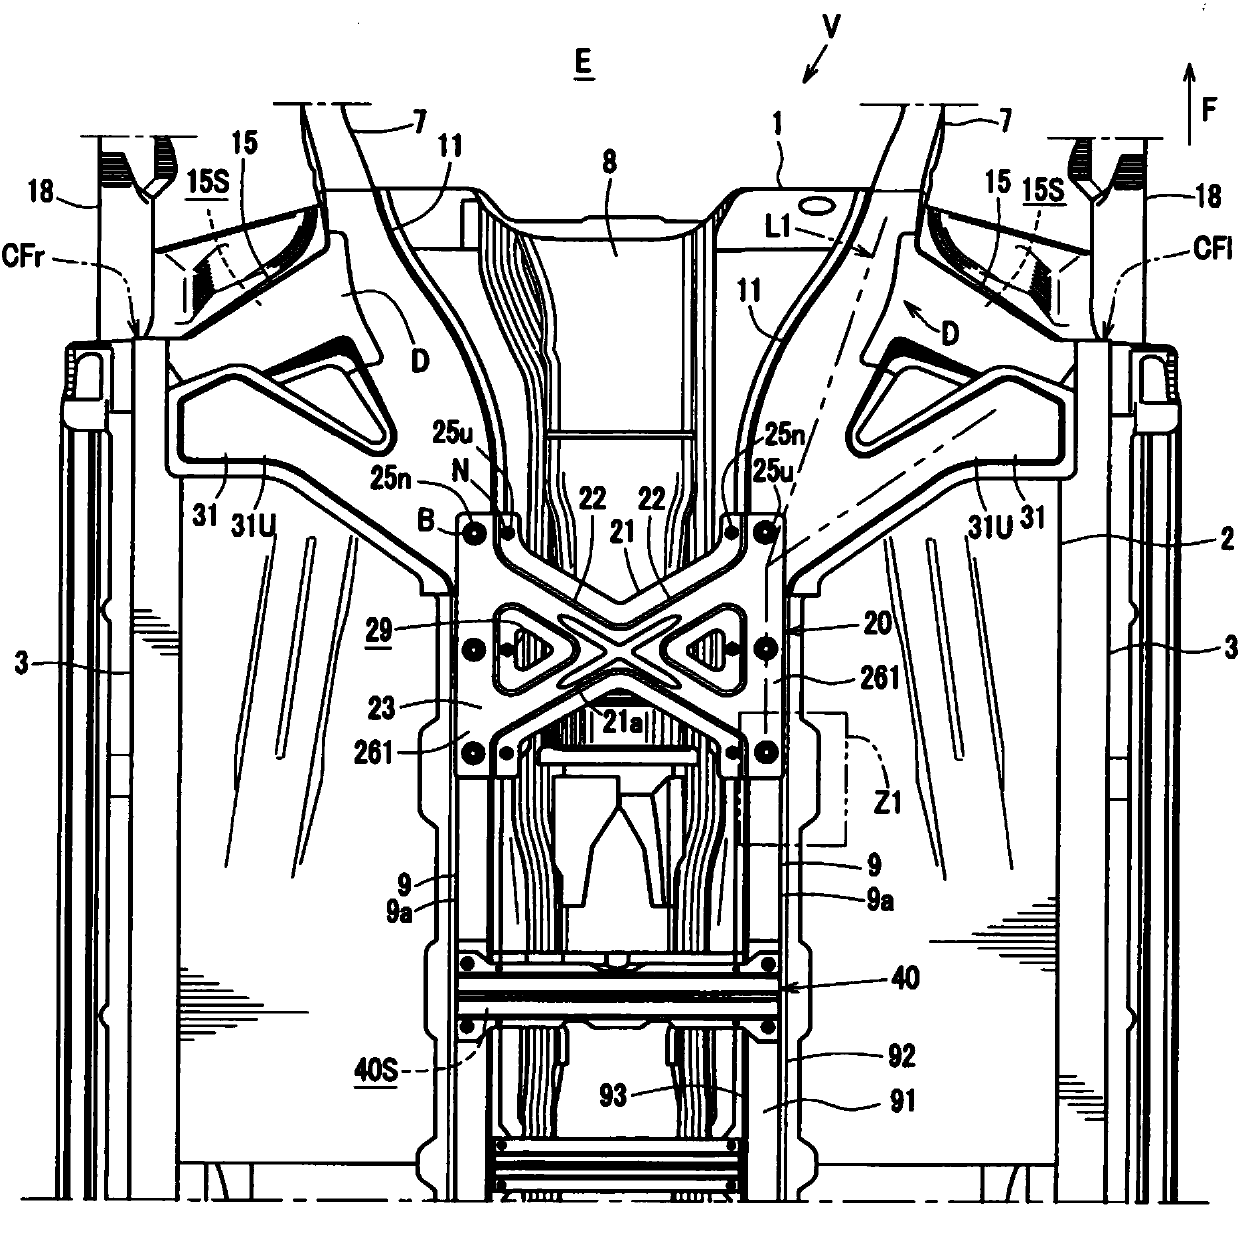 Underbody structure of the vehicle